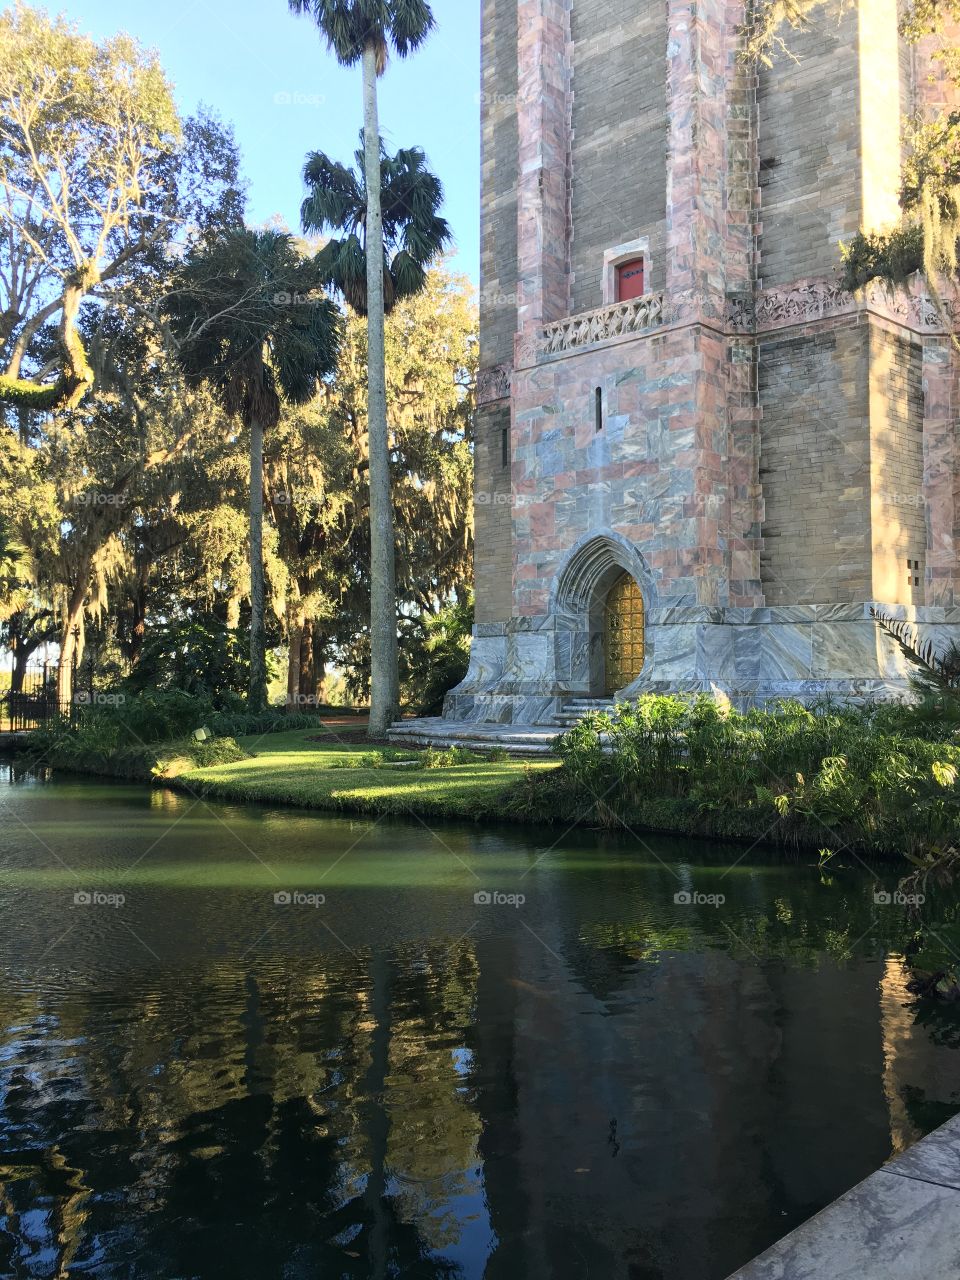 Tranquil scene of a pond lined with tropical trees and mossy live oaks near a tower with a golden door